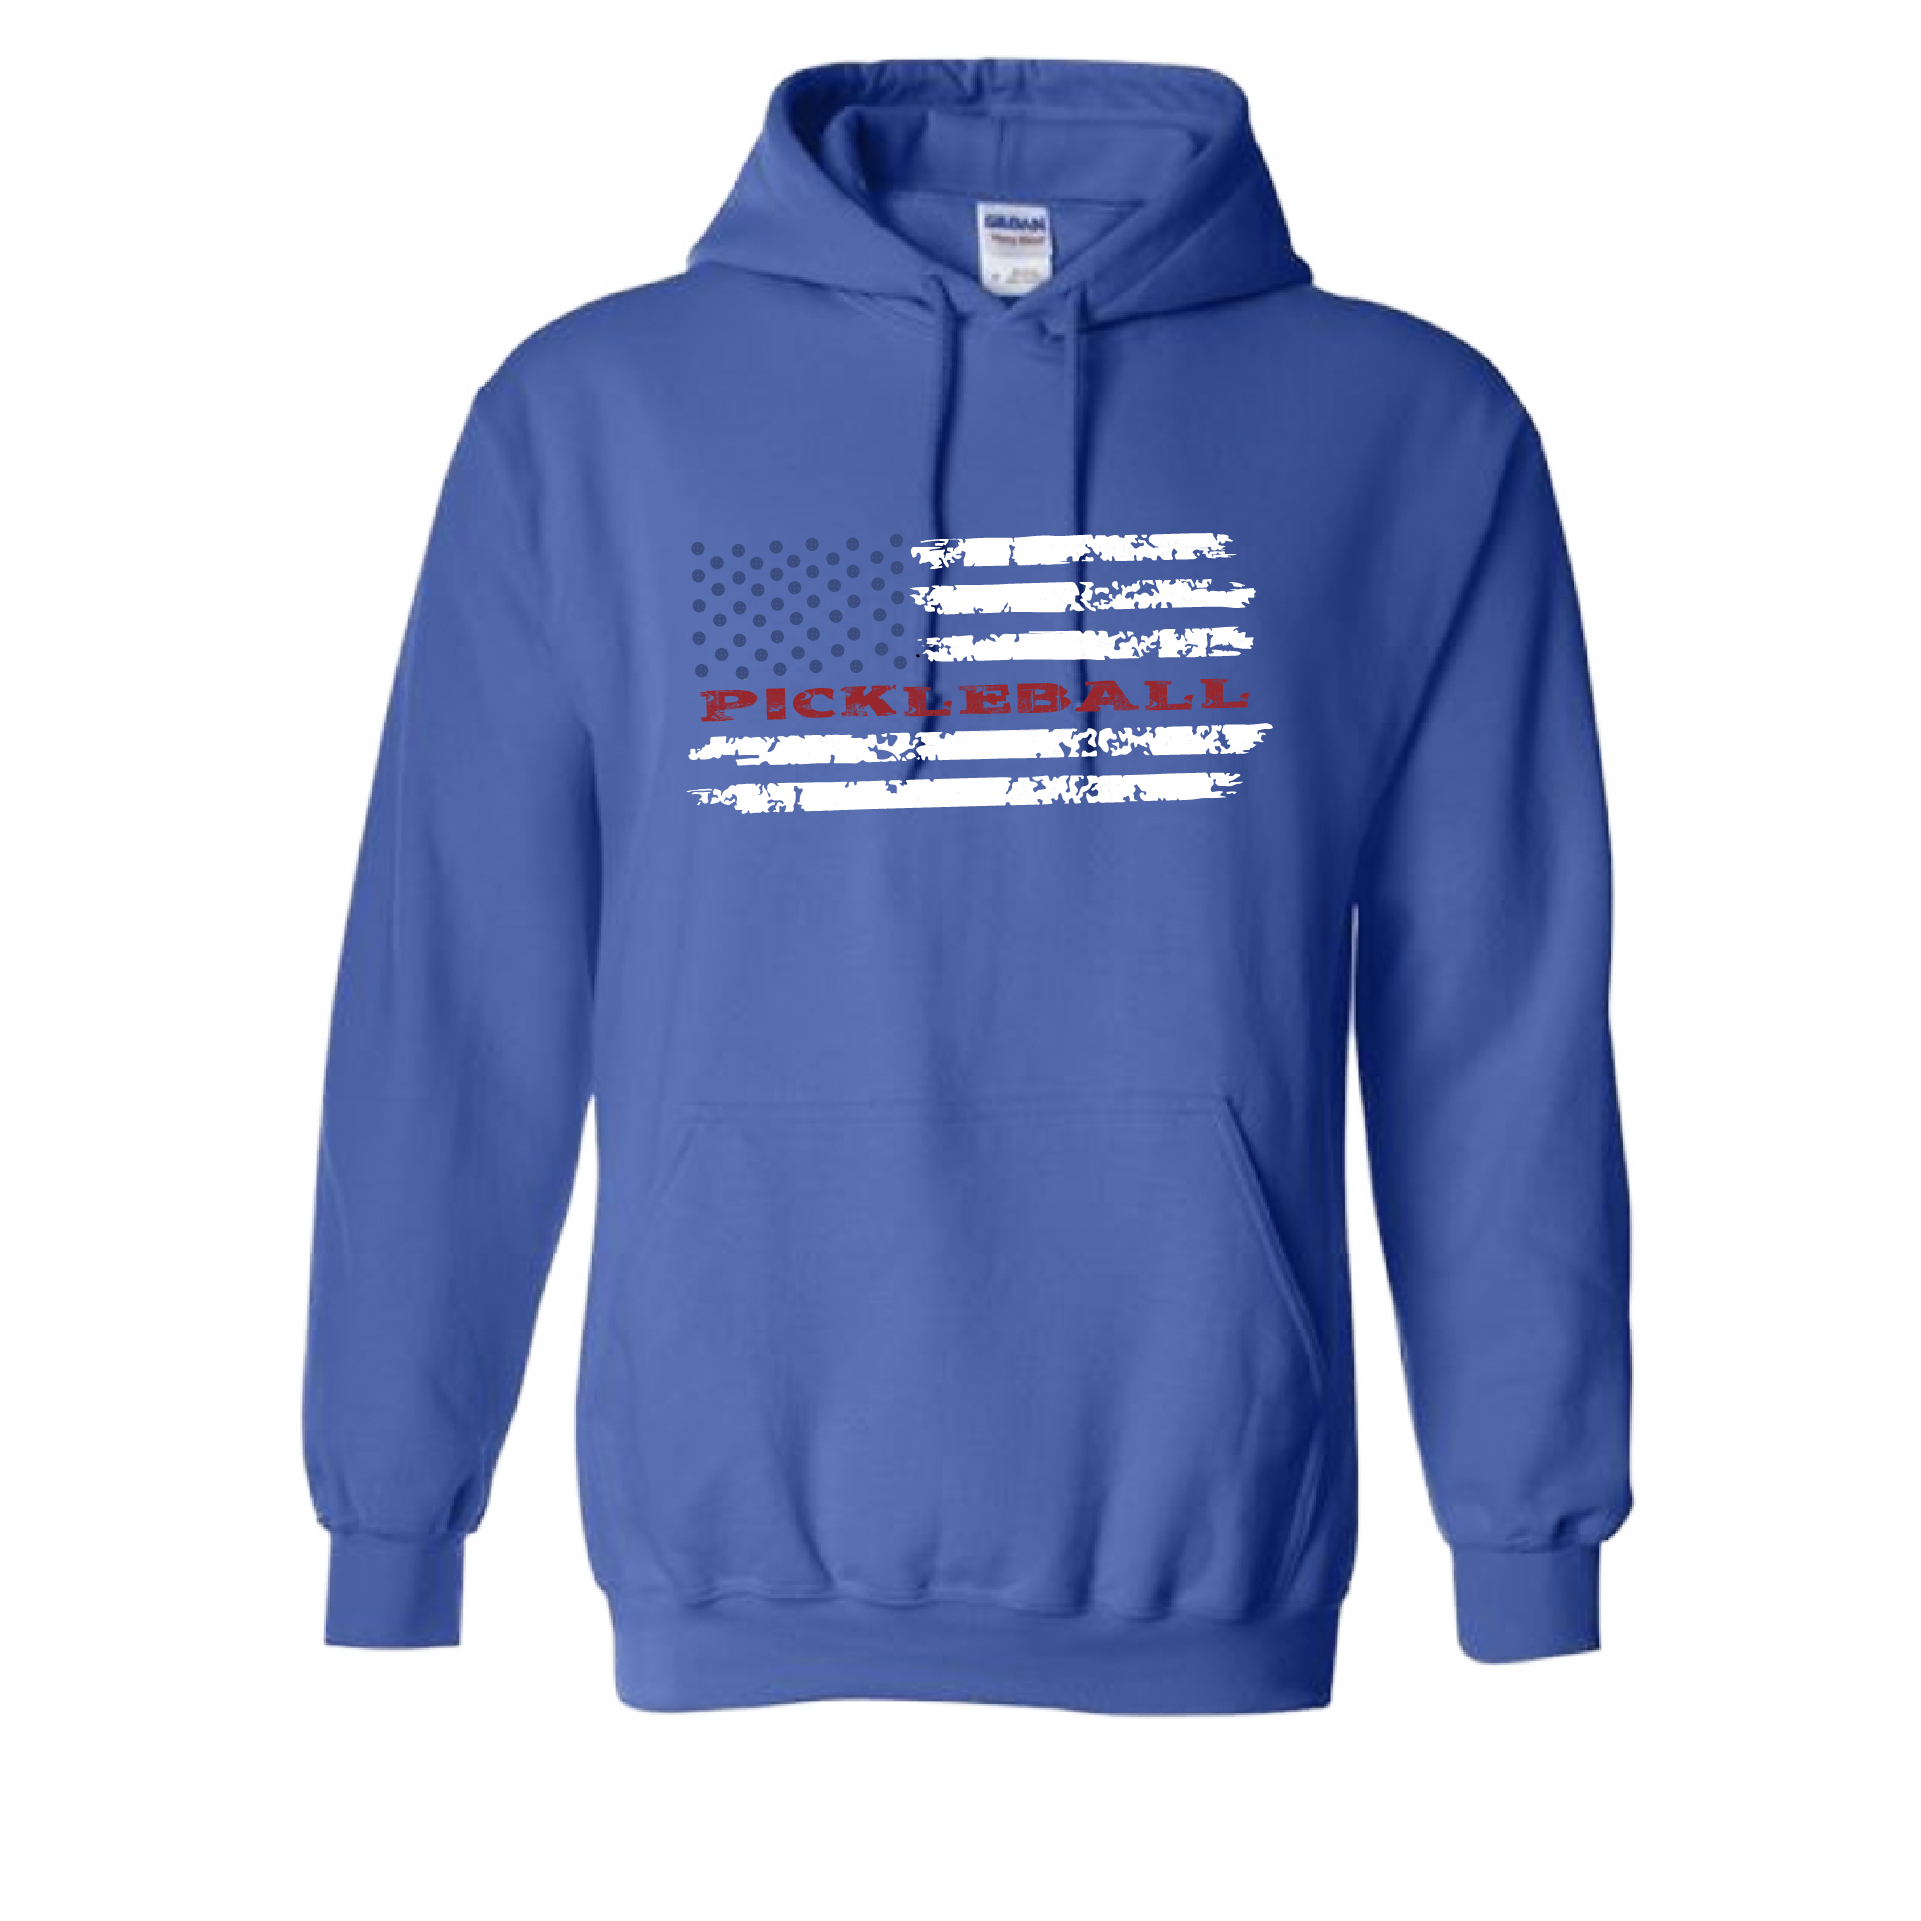 Design: Pickleball Flag Horizontal or Vertial  Unisex Hooded Sweatshirt: Moisture-wicking, double-lined hood, front pouch pocket.  This unisex hooded sweatshirt is ultra comfortable and soft. Stay warm on the Pickleball courts while being that hit with this one of kind 